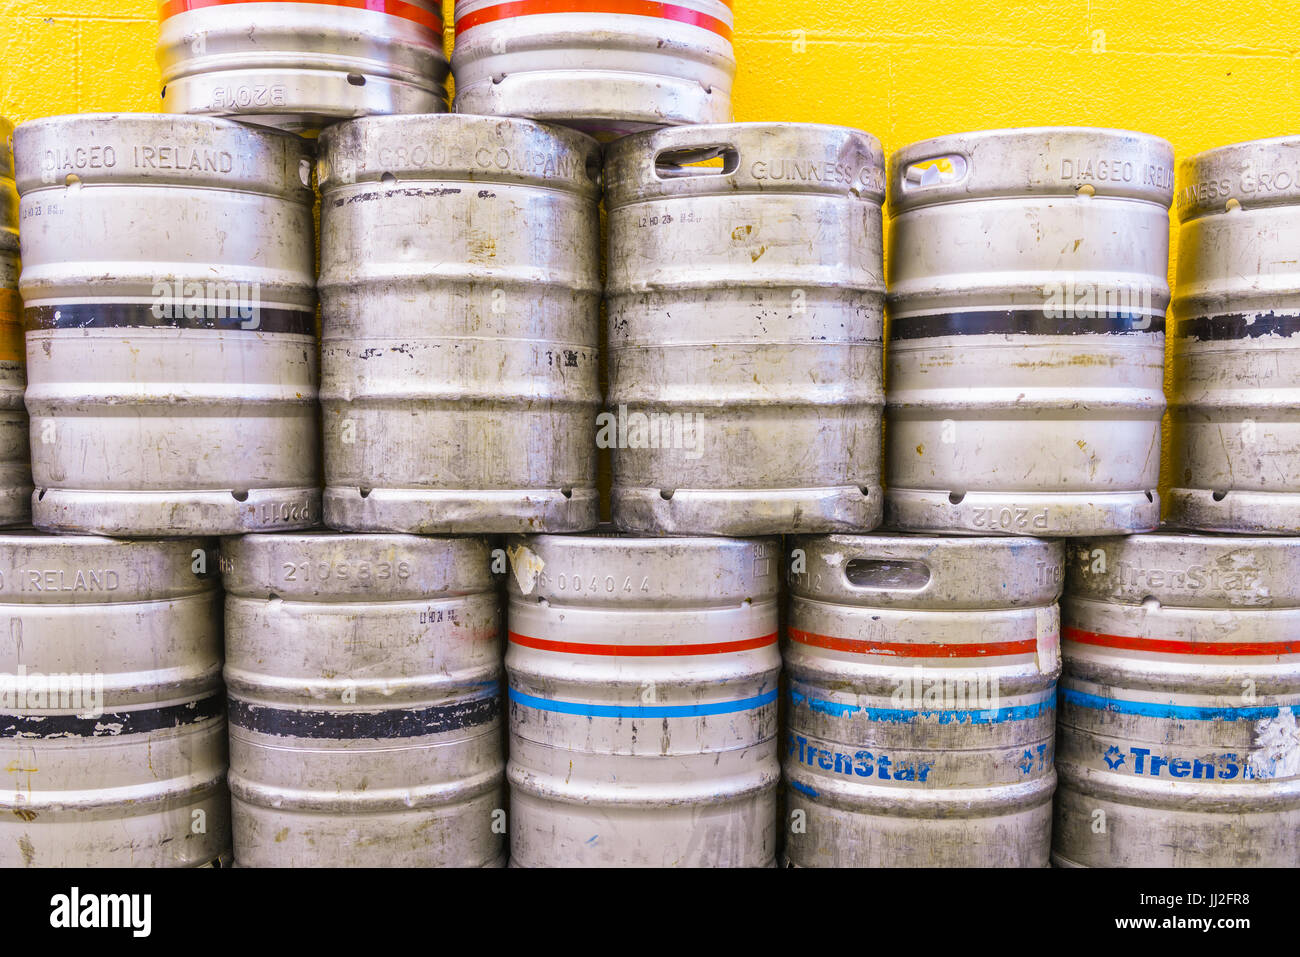 Aluminium beer kegs stacked up against a painted orange wall at an Irish pub. Stock Photo